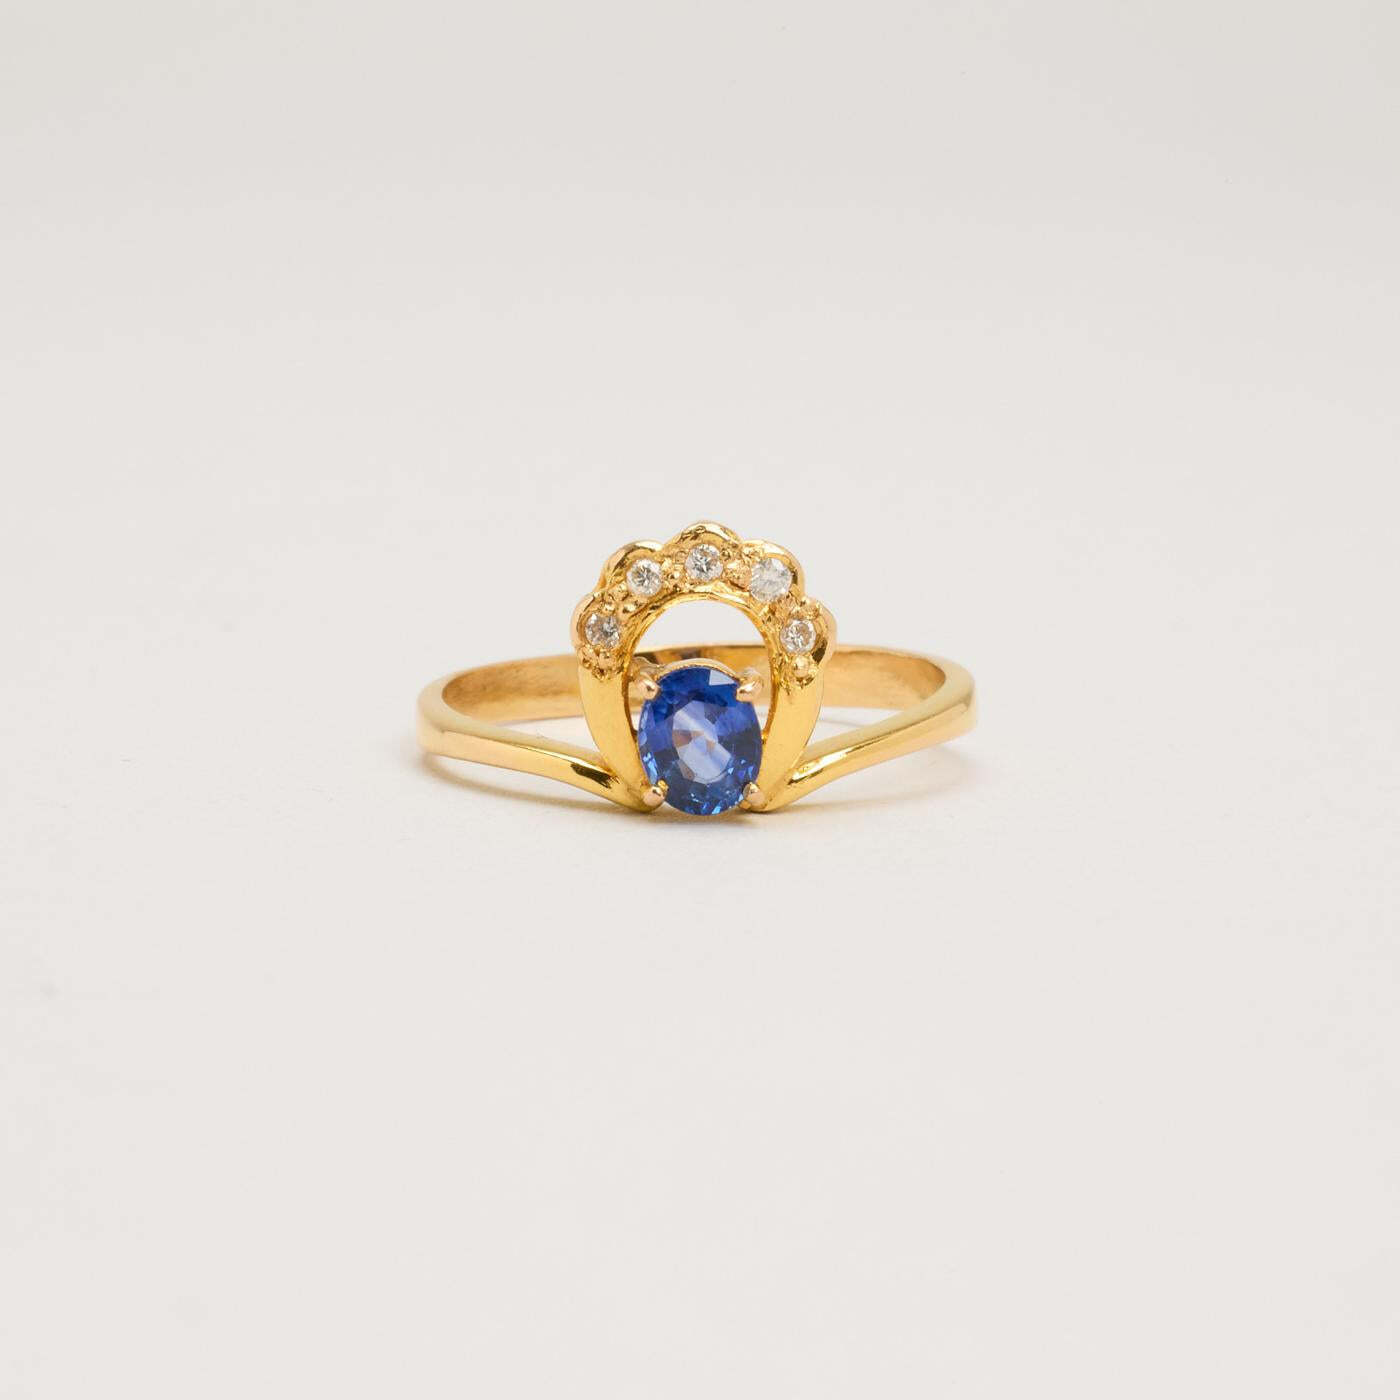 Ring with and sapphirewith diamond (0.025 ct) in 18K Gold size 6